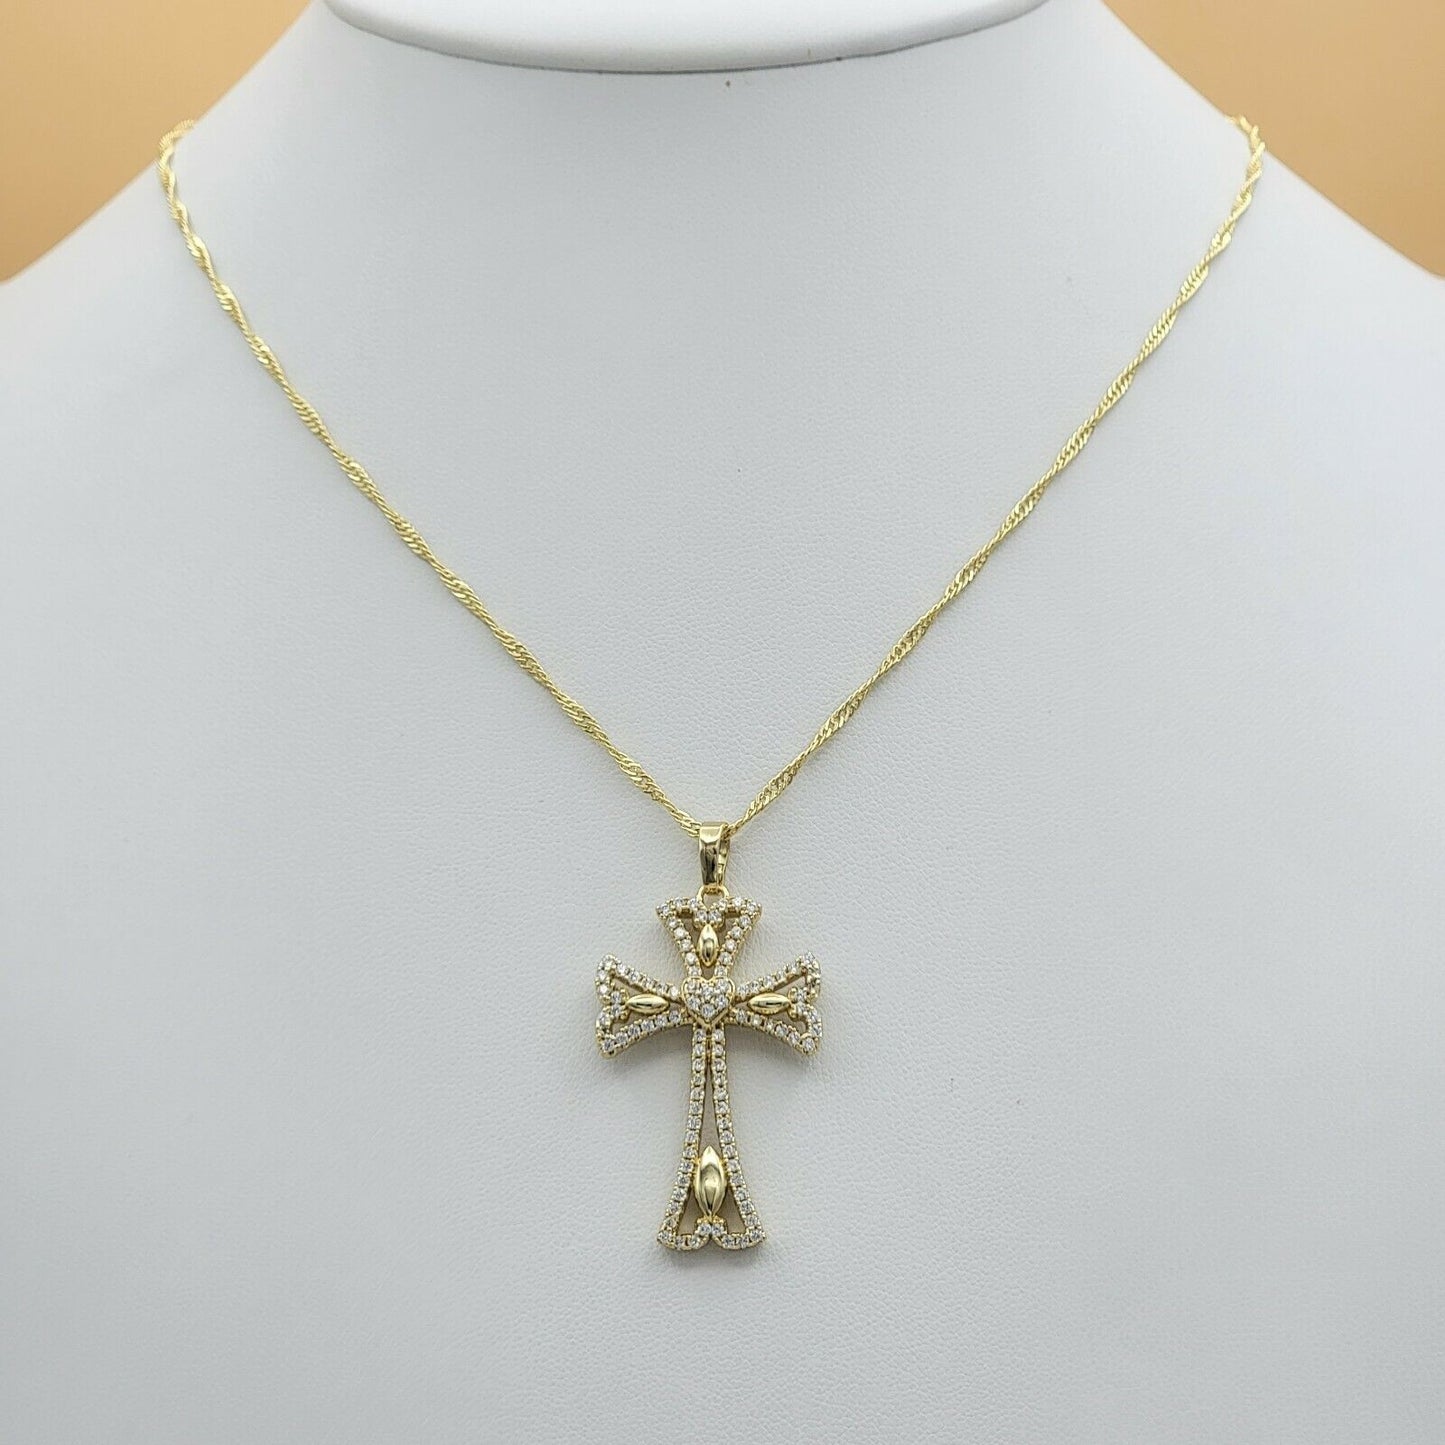 Necklaces - 14K Gold Plated. Icy Crystal CROSS HEART Pendant & Chain.